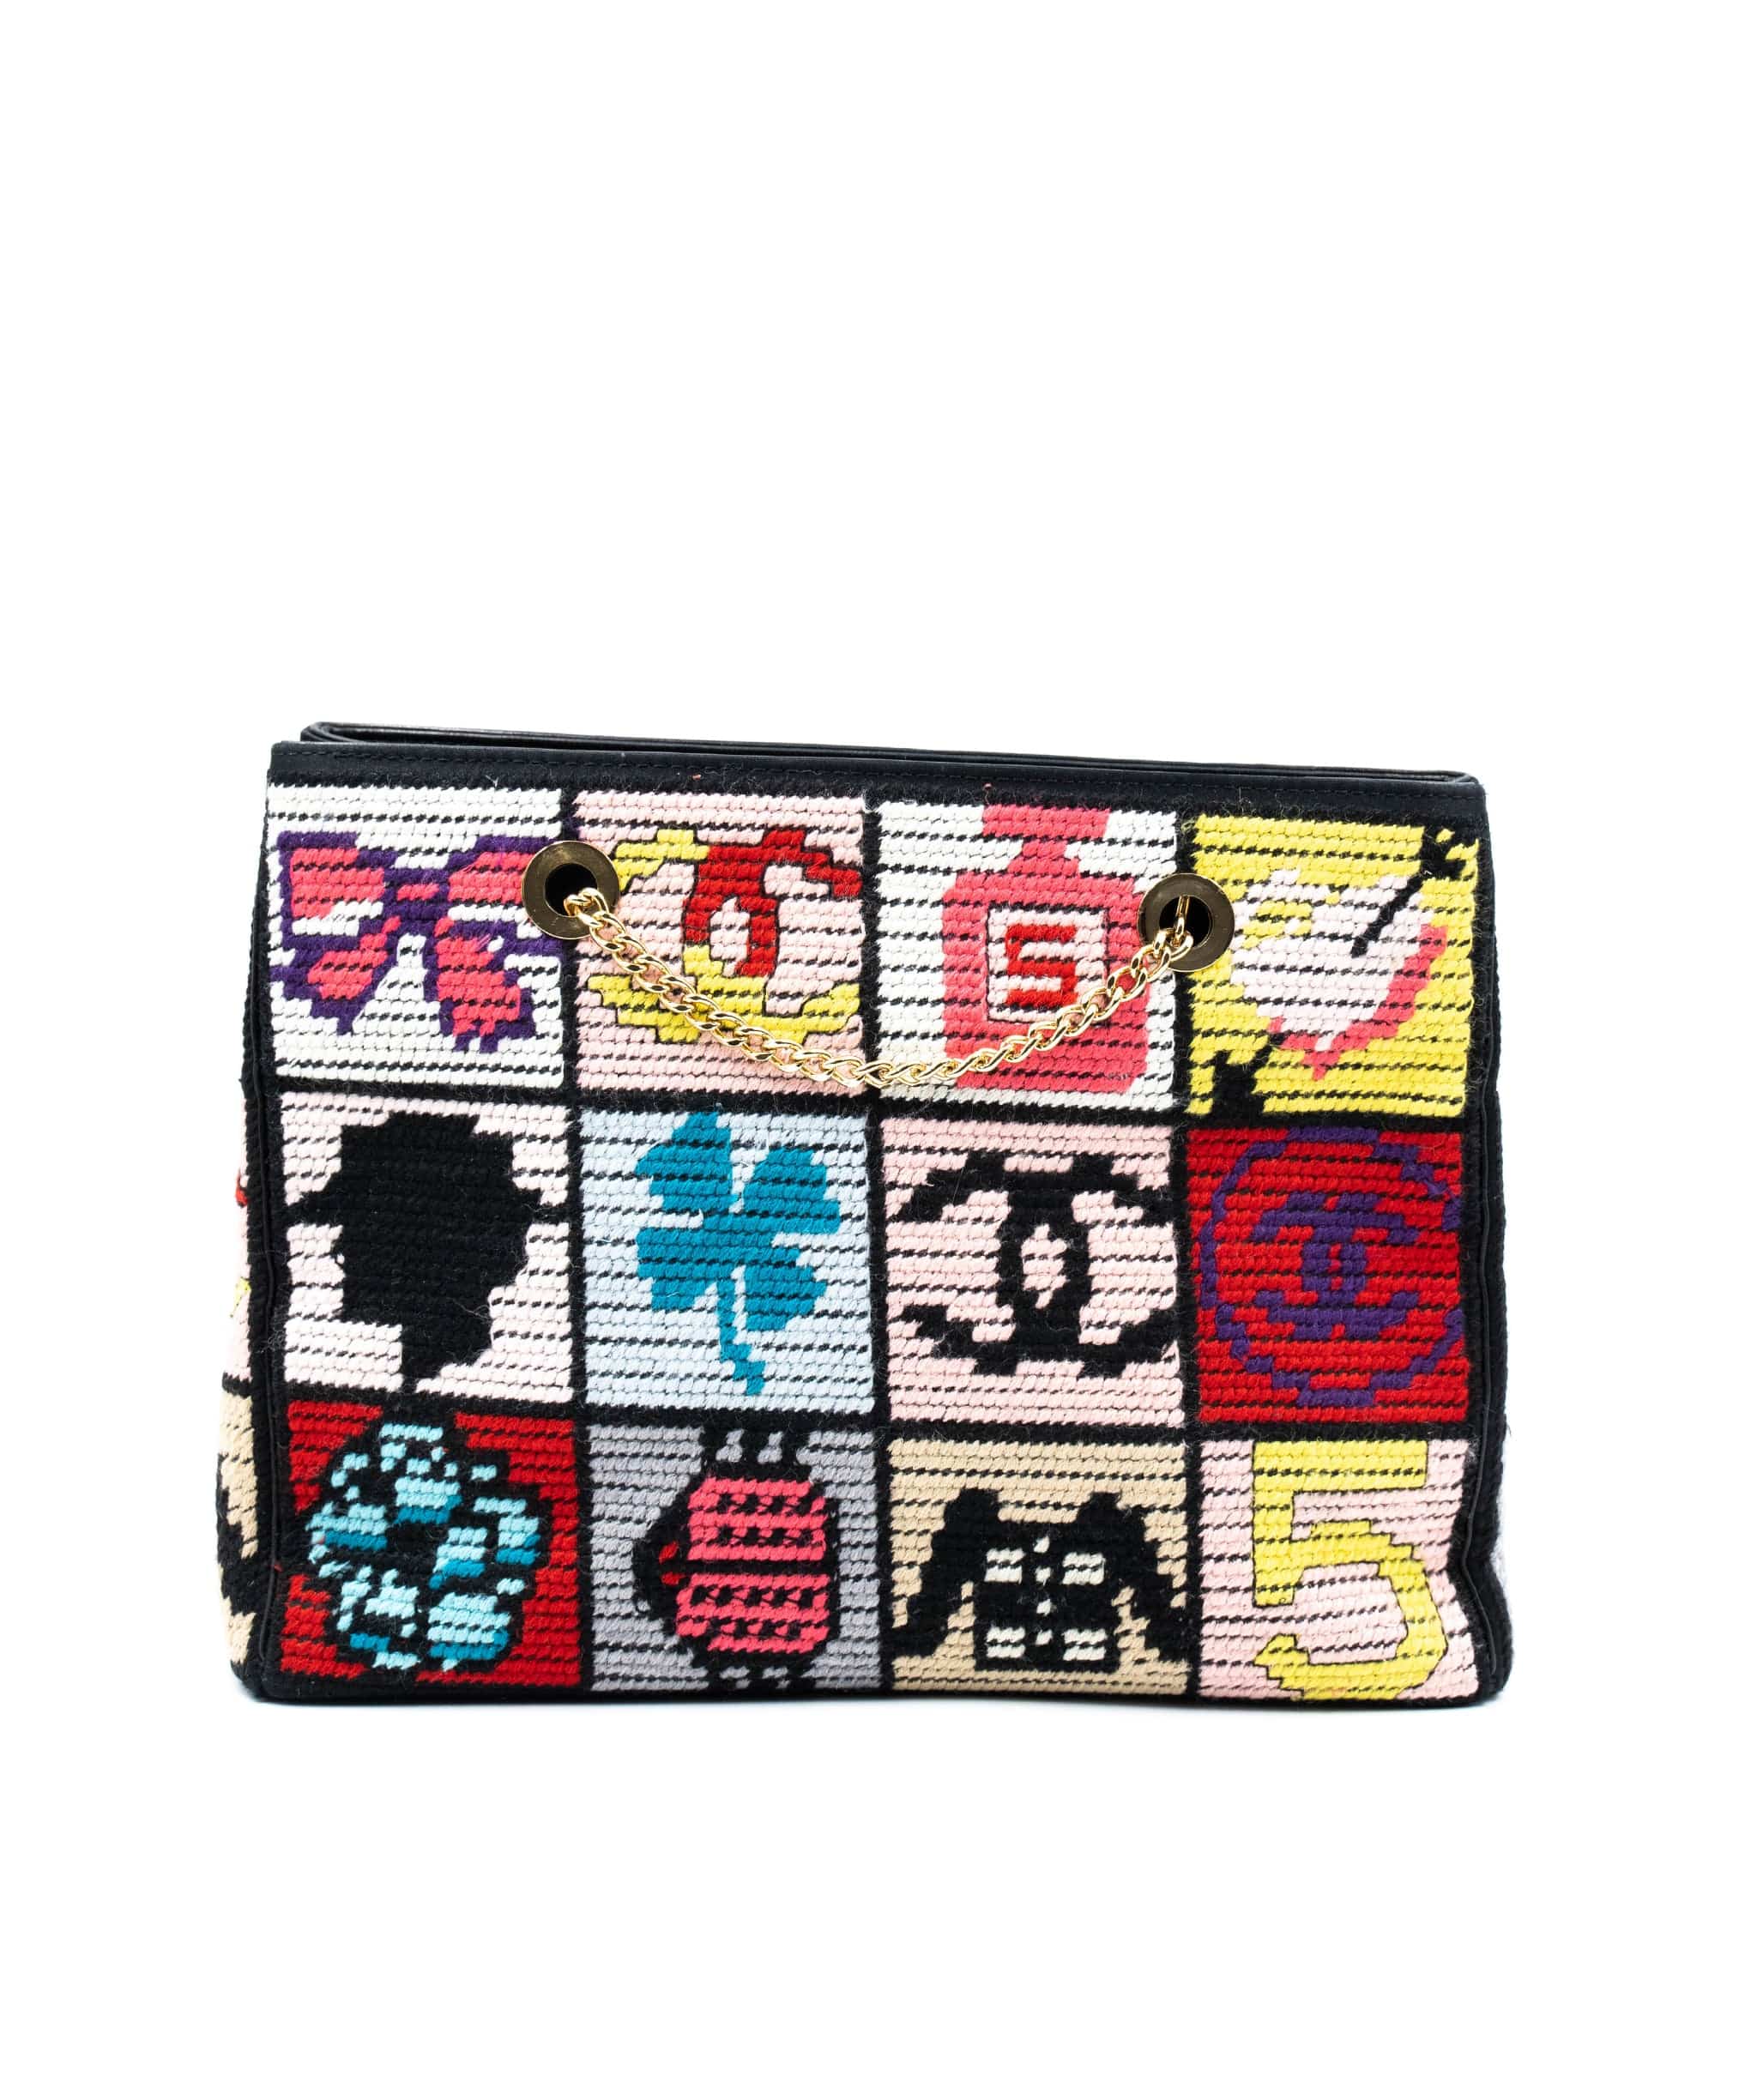 Chanel Chanel Patchwork Needle Point Stitch Bag  AGC1148